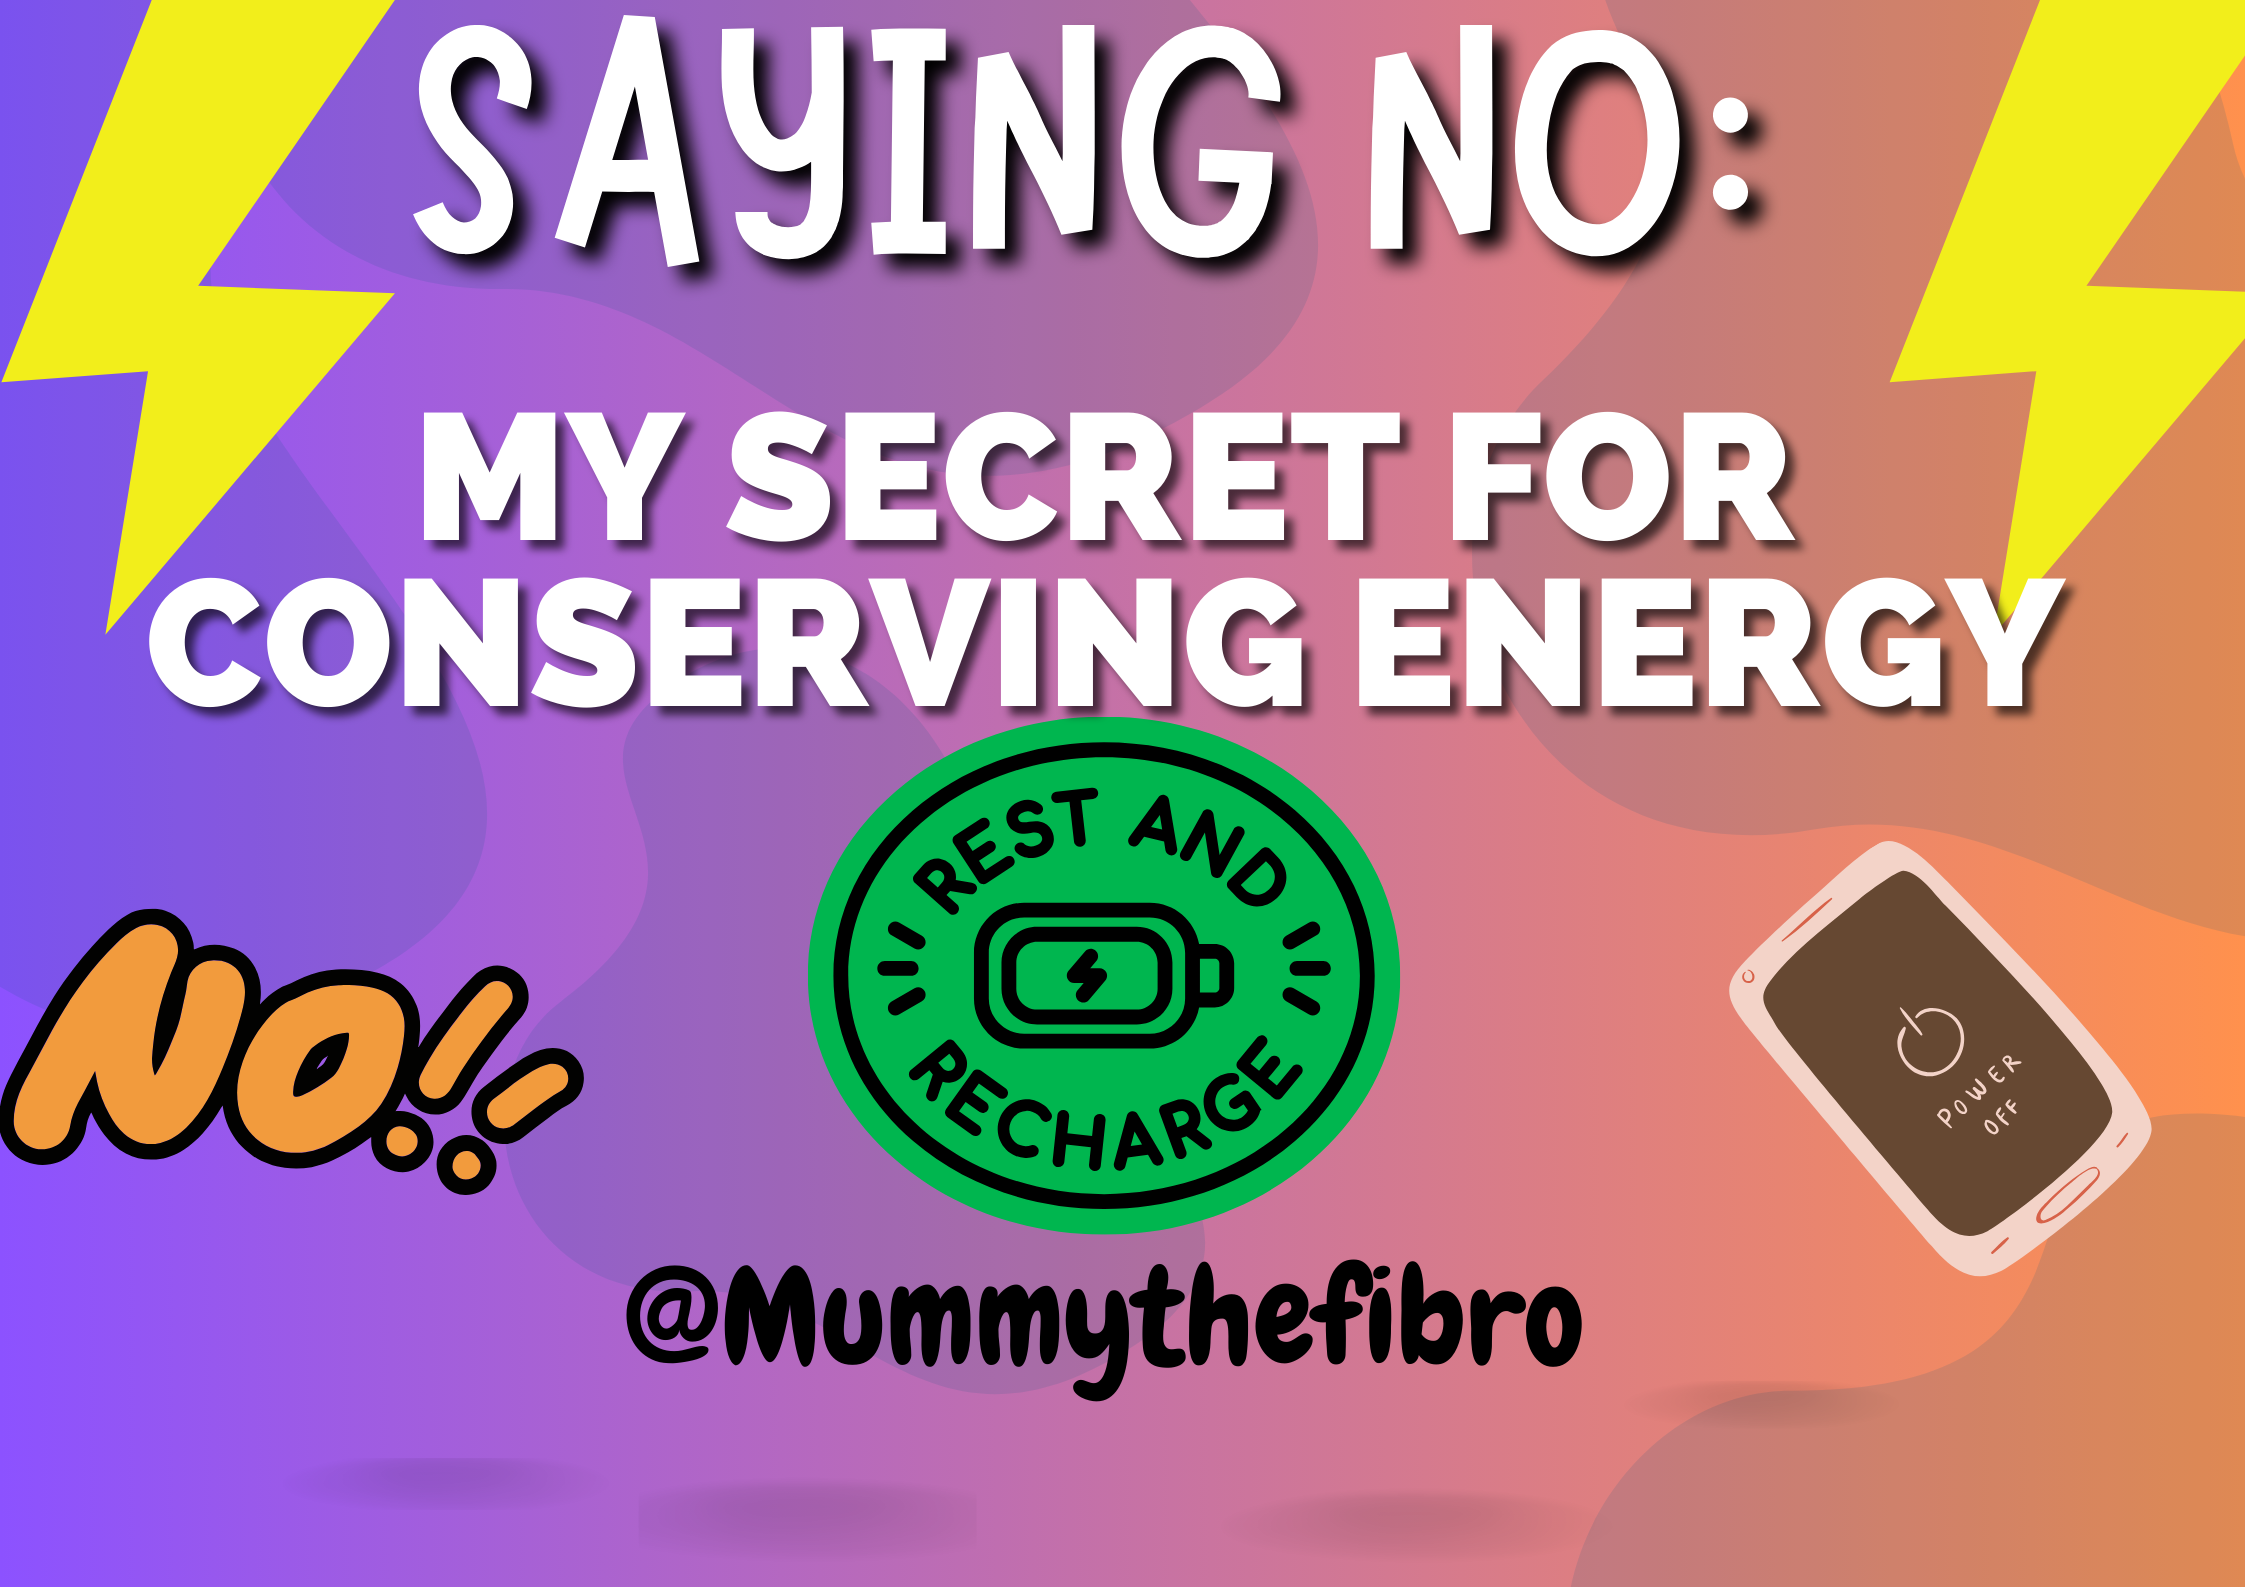 Saying No: My Secret For Conserving Energy